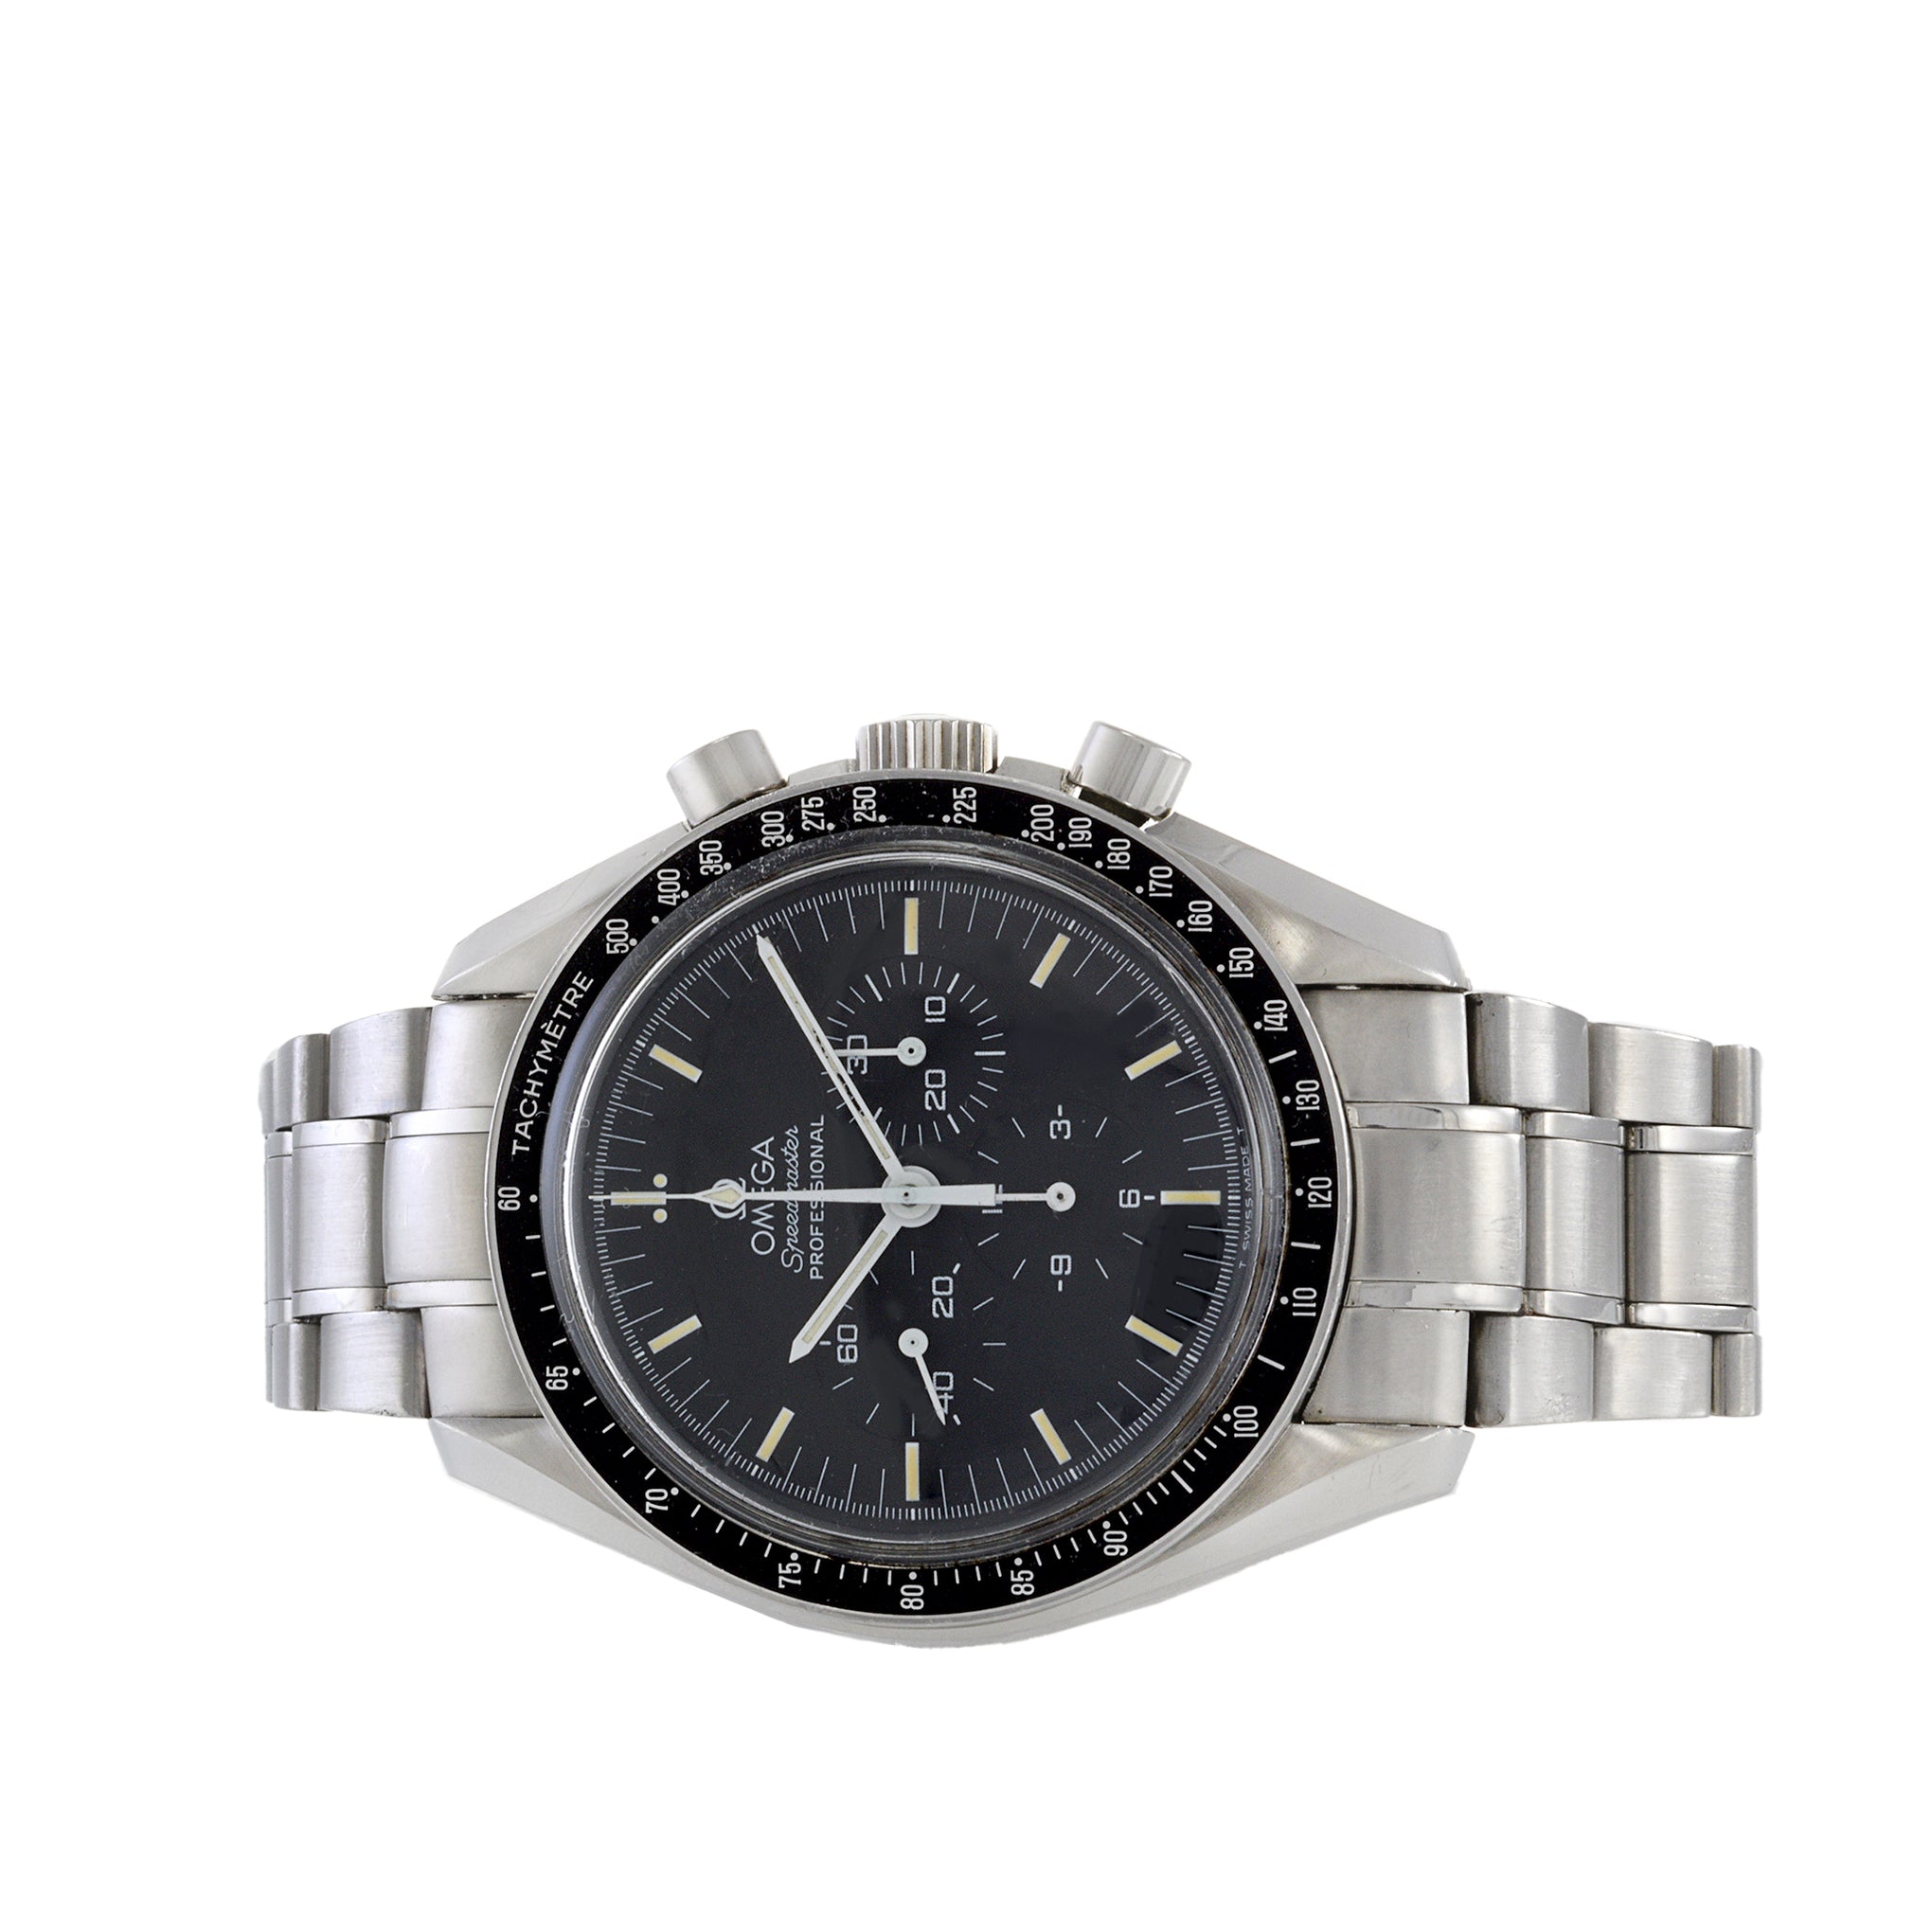 Omega Speedmaster Moon Watch Reference 145.0022 1985 Manufacture